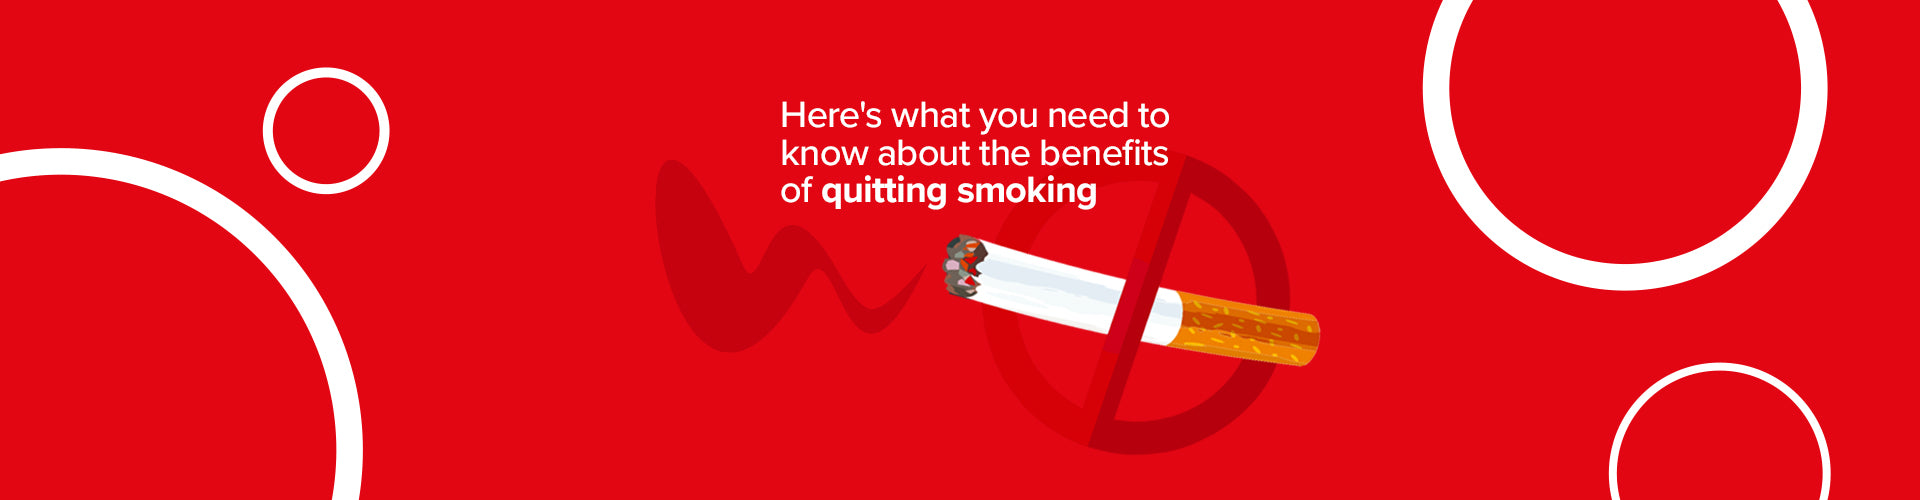 Here's what you need to know about the benefits of quitting smoking